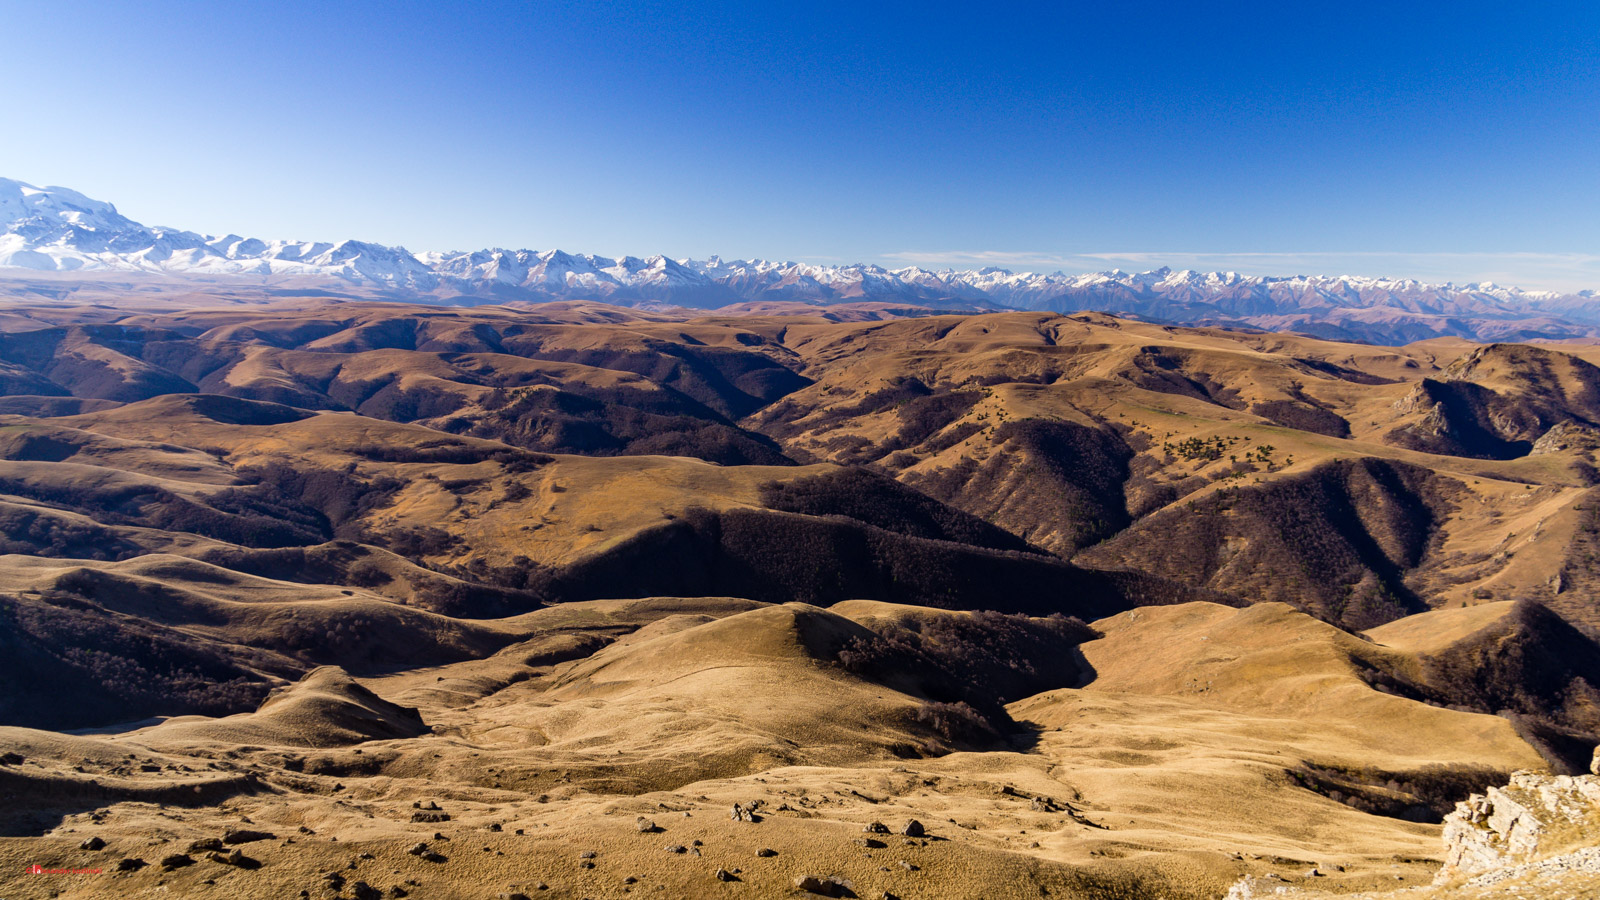 View of the Main Caucasus Range from the Bermamyt Plateau